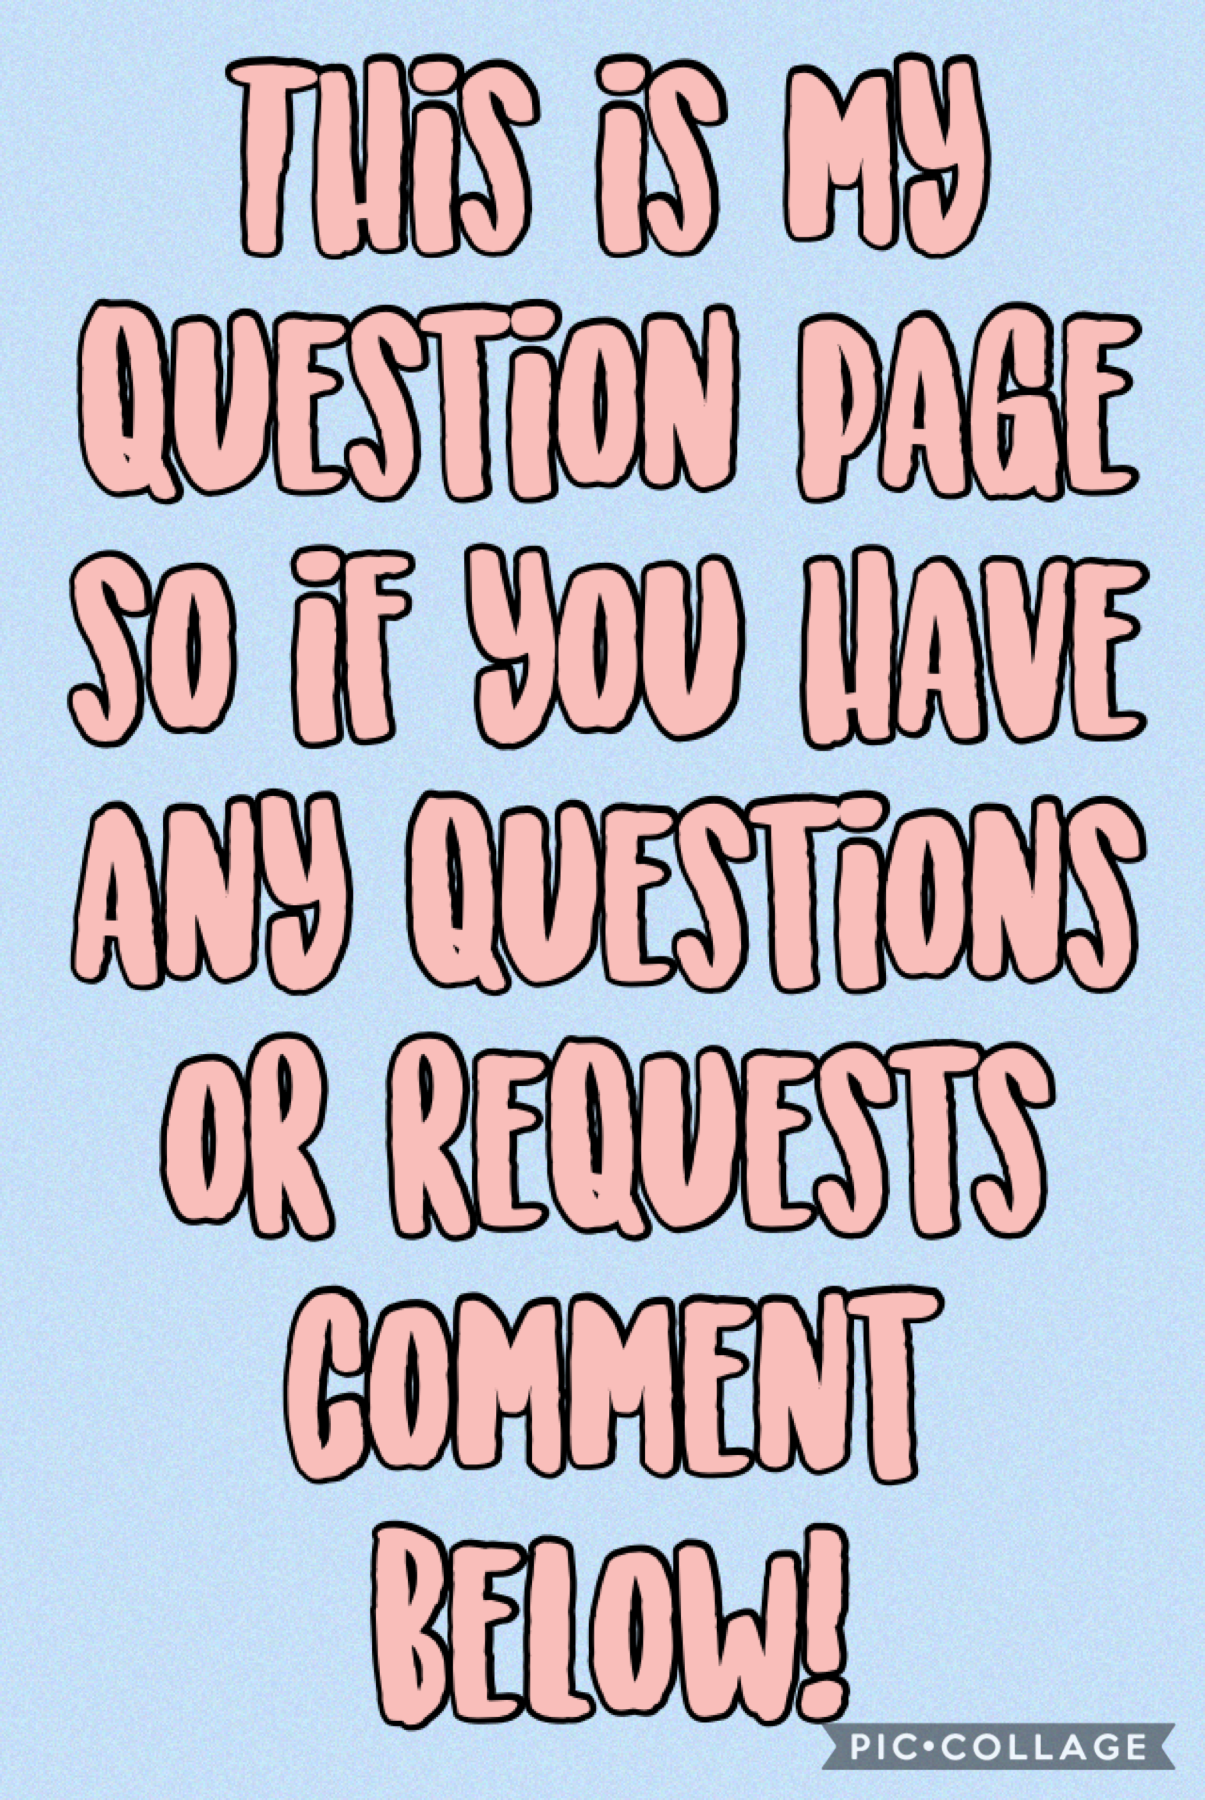 Plz comment
Below for any questions!!!